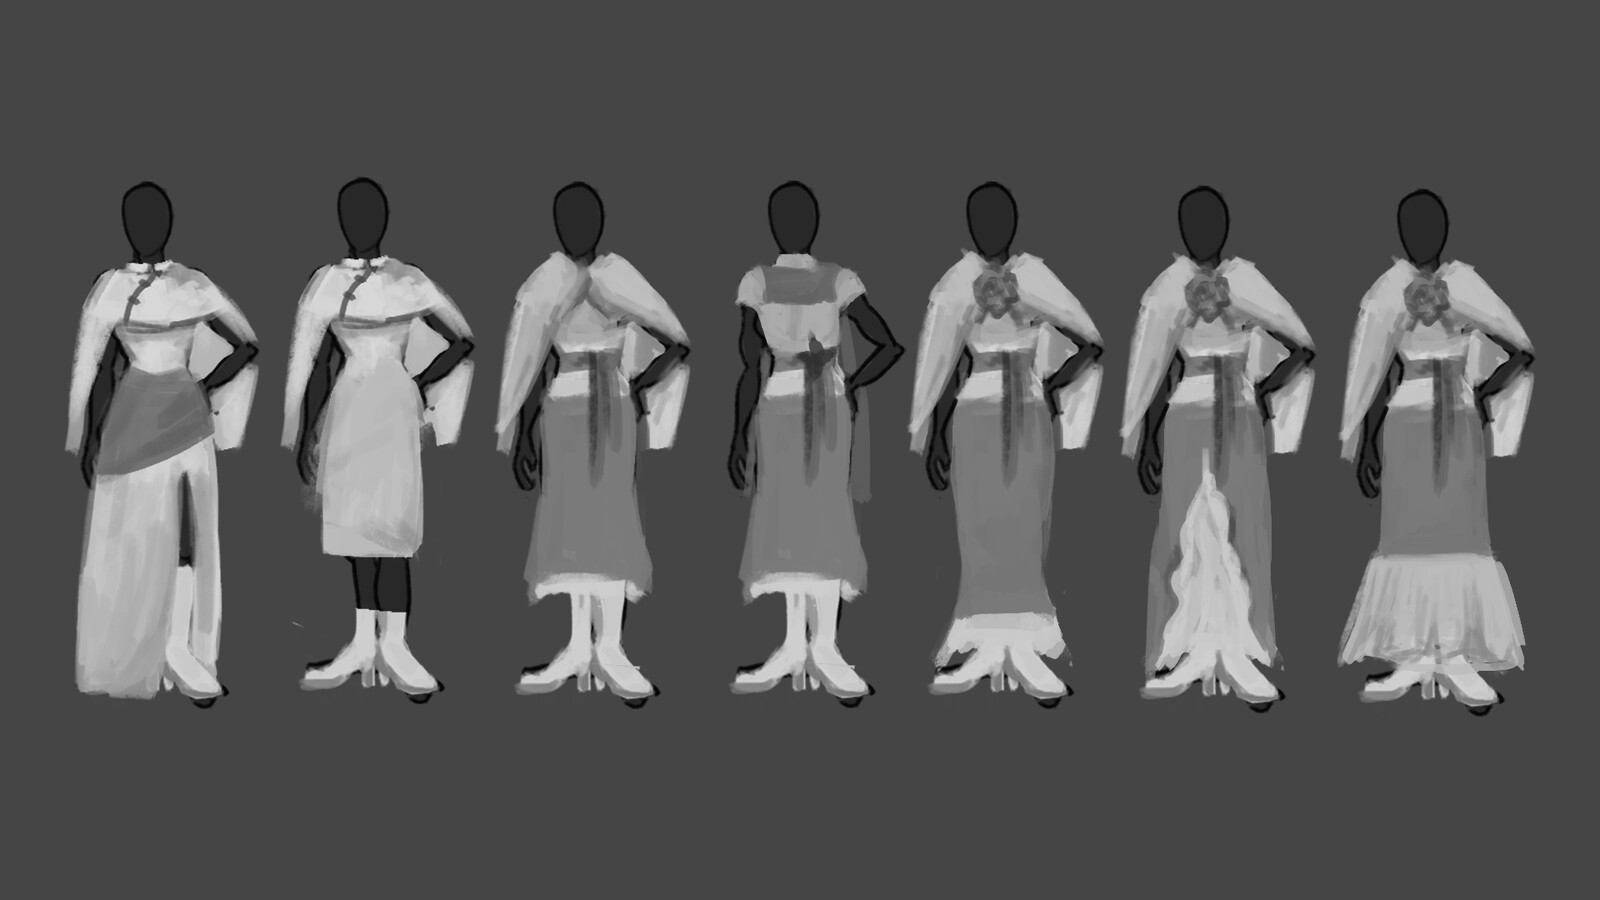 Final outfit silhouette iterations